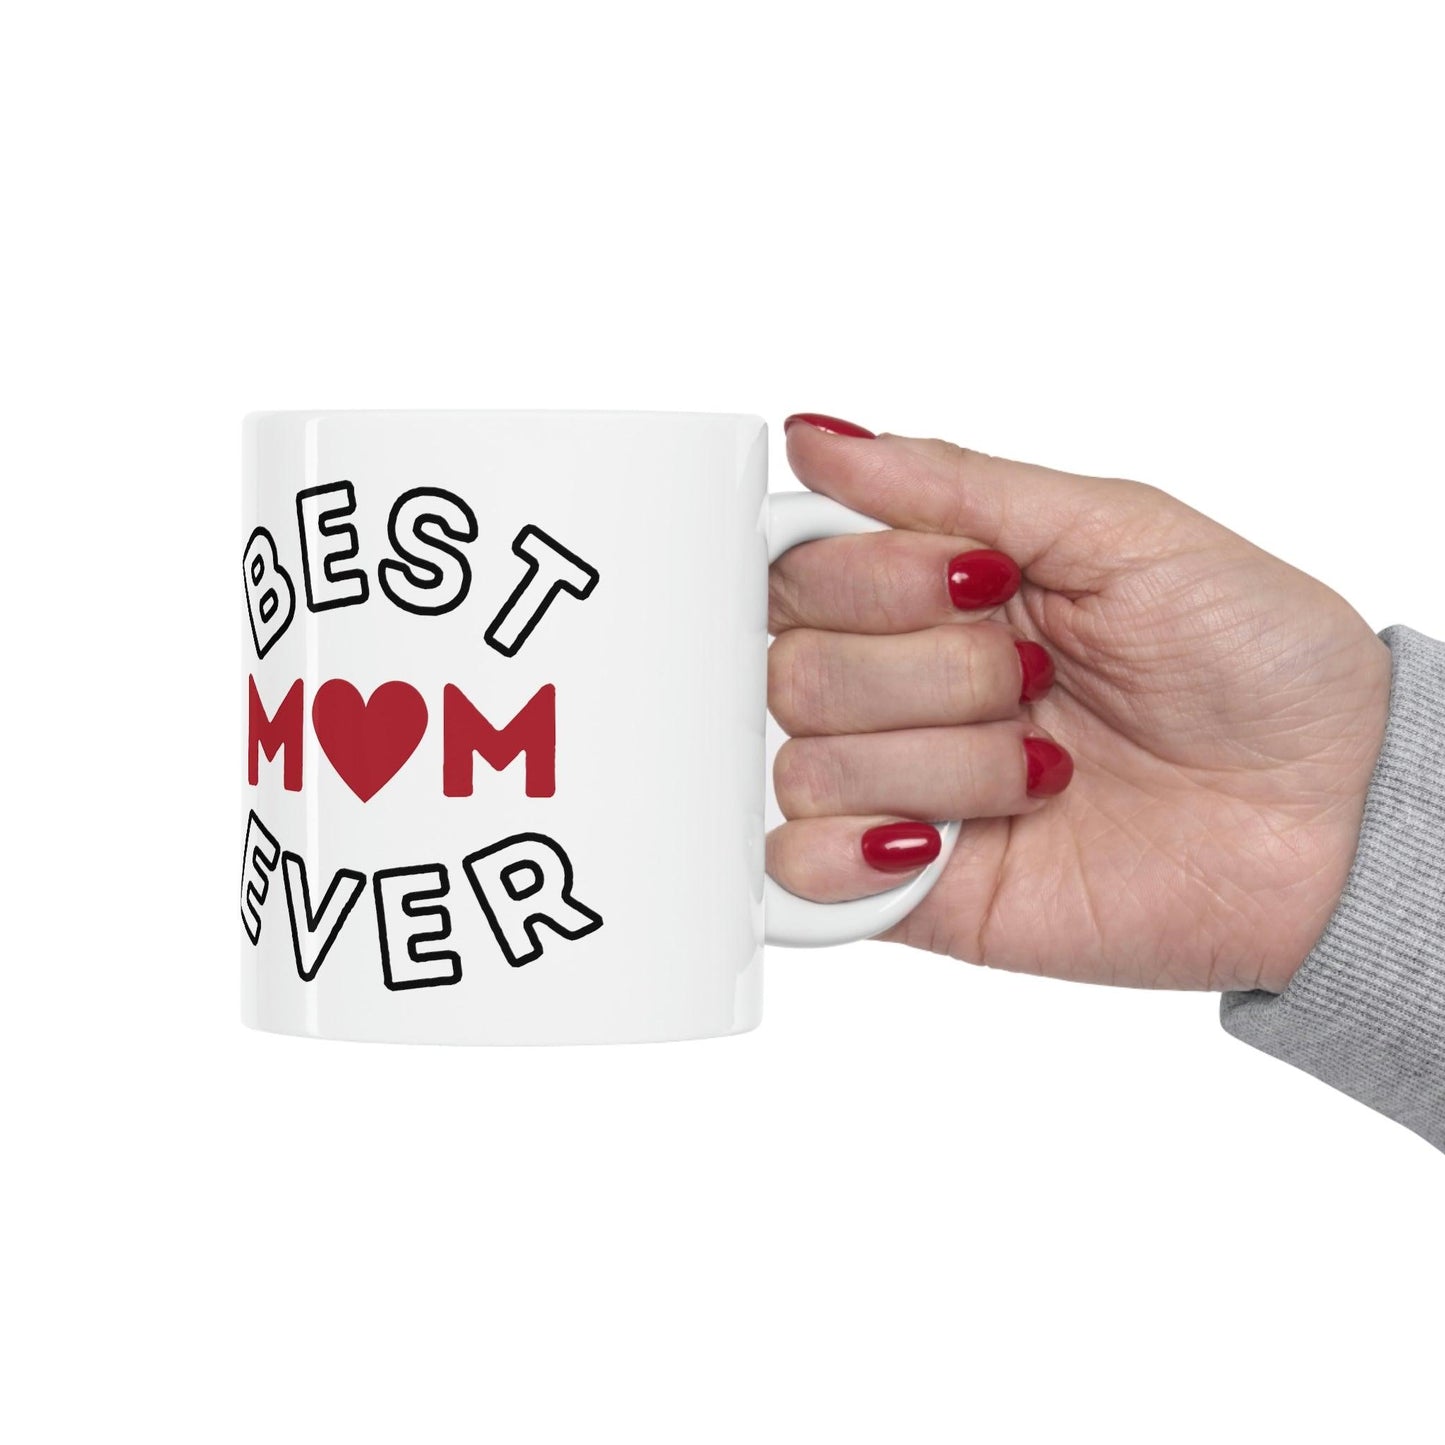 Best Mom Ever Mug, gift for mom on mothers day, Birthday gift for mom, gift for her, coffee mug for her, hot cocoa mug, gift for coffee lover